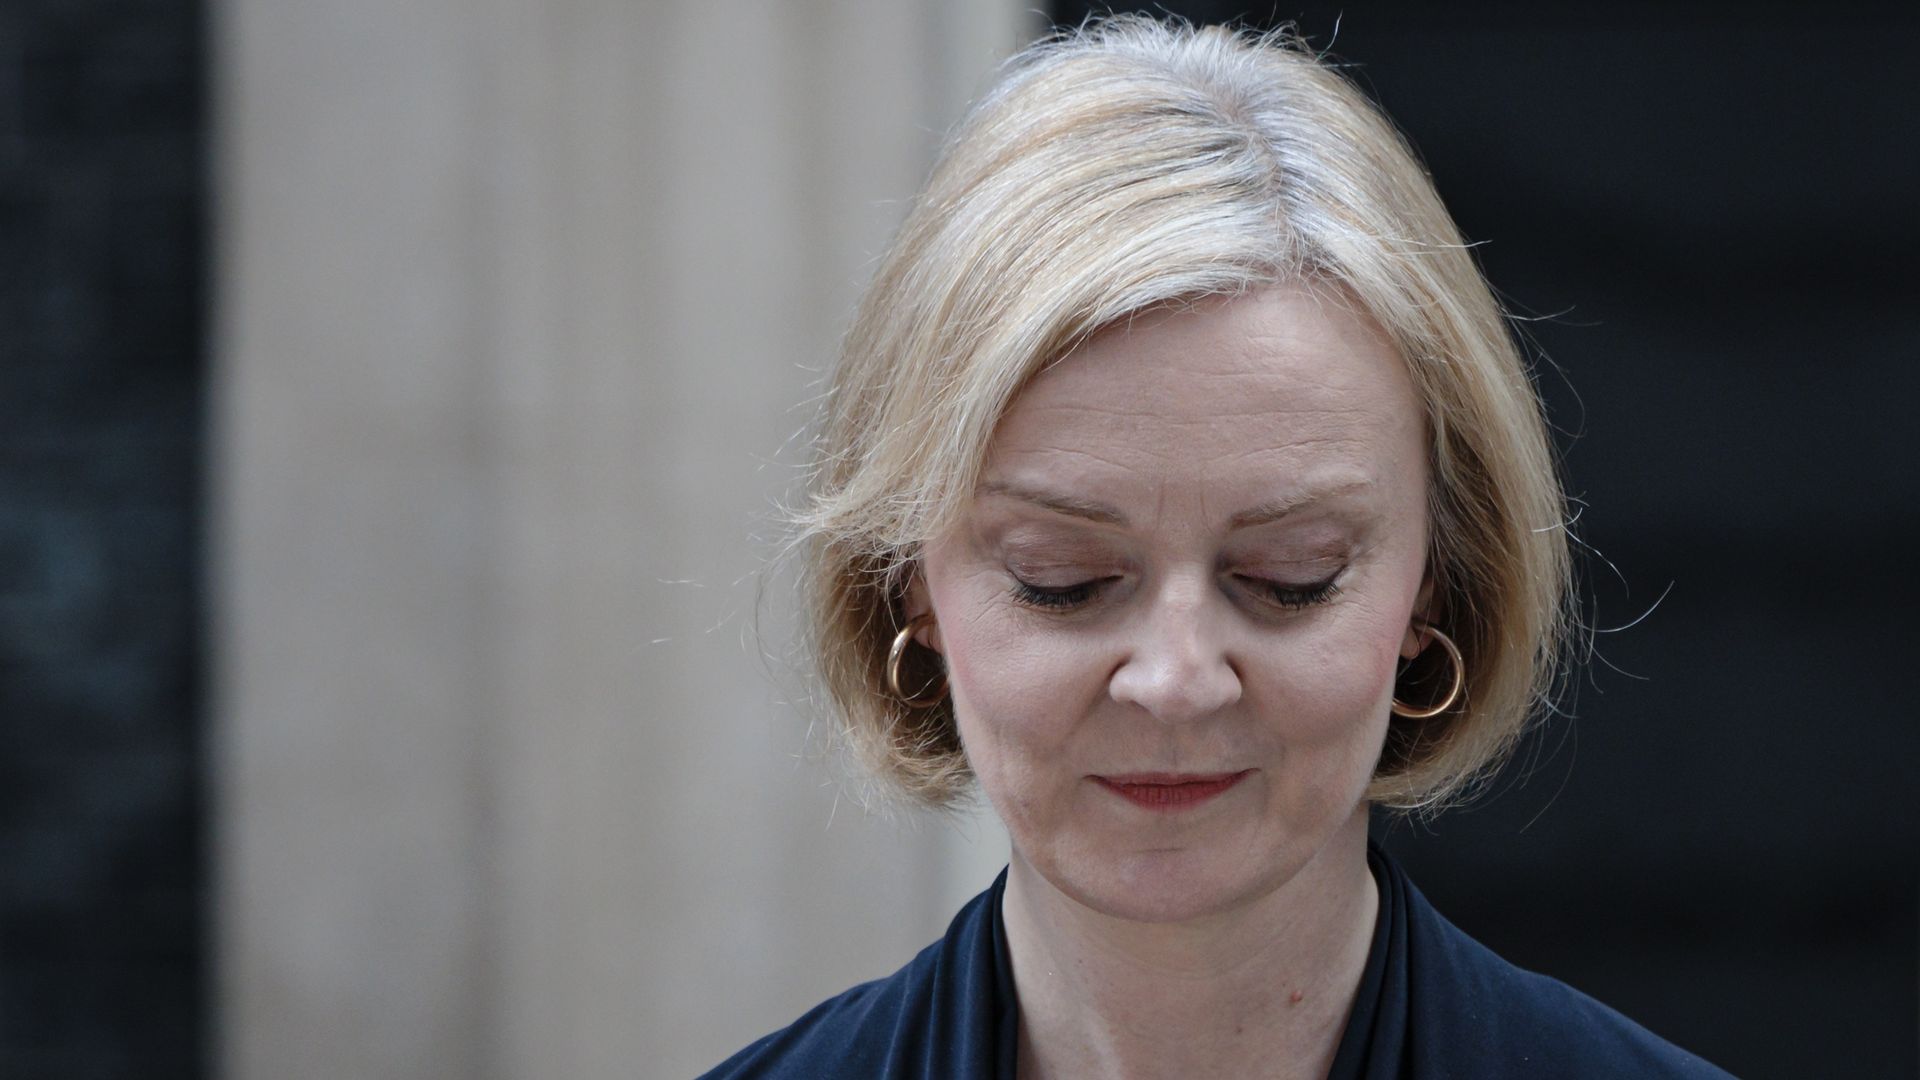 Photo of Liz Truss announcing she would step down as U.K. prime minister.